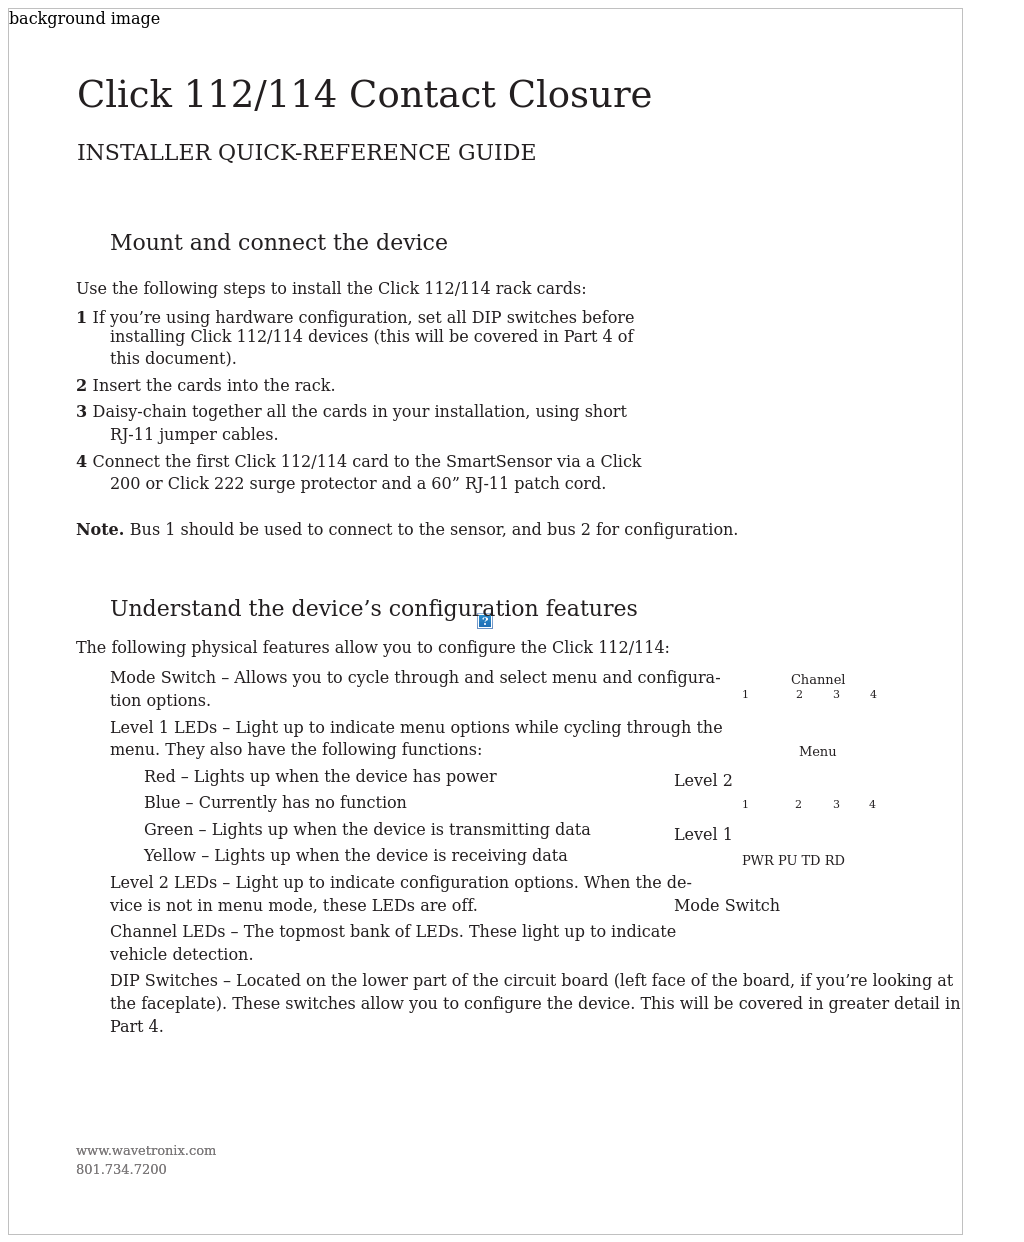 Click 112 (detector rack card) (CLK-112) - Quick-reference Guide